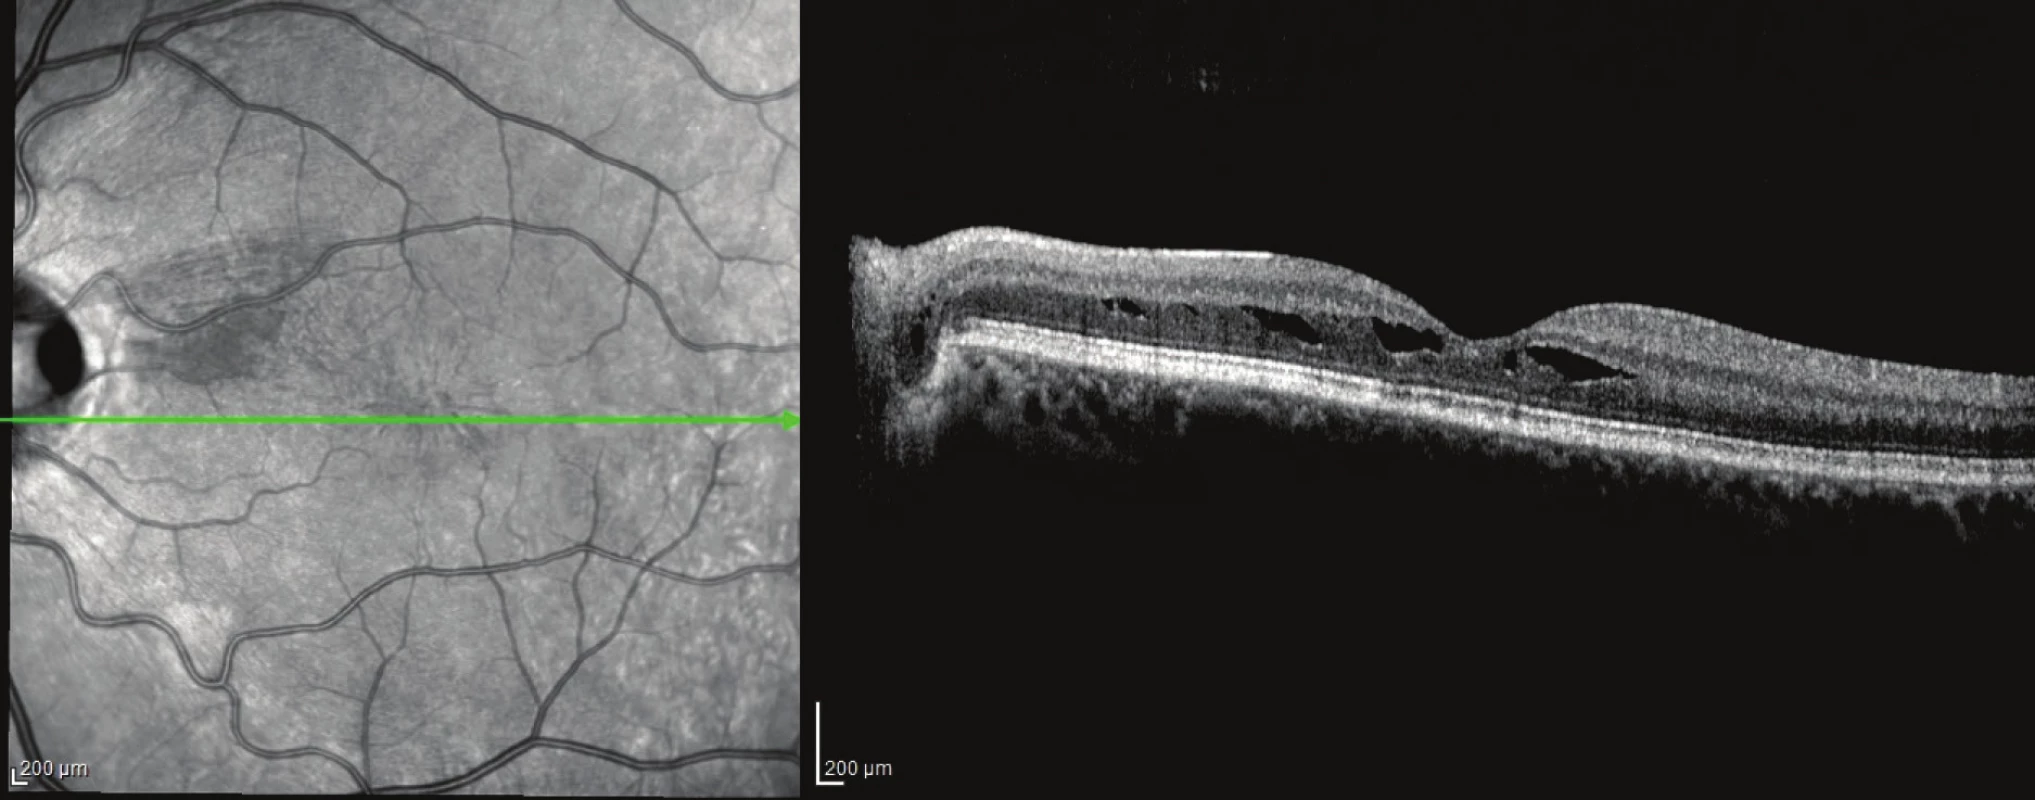 Patient no. 4 Linear horizontal transpapillary OCT scan of LE after PPV, resorption of subretinal fluid and closed communication between the optic disc pit and macular retinoschisis of external layer of retina